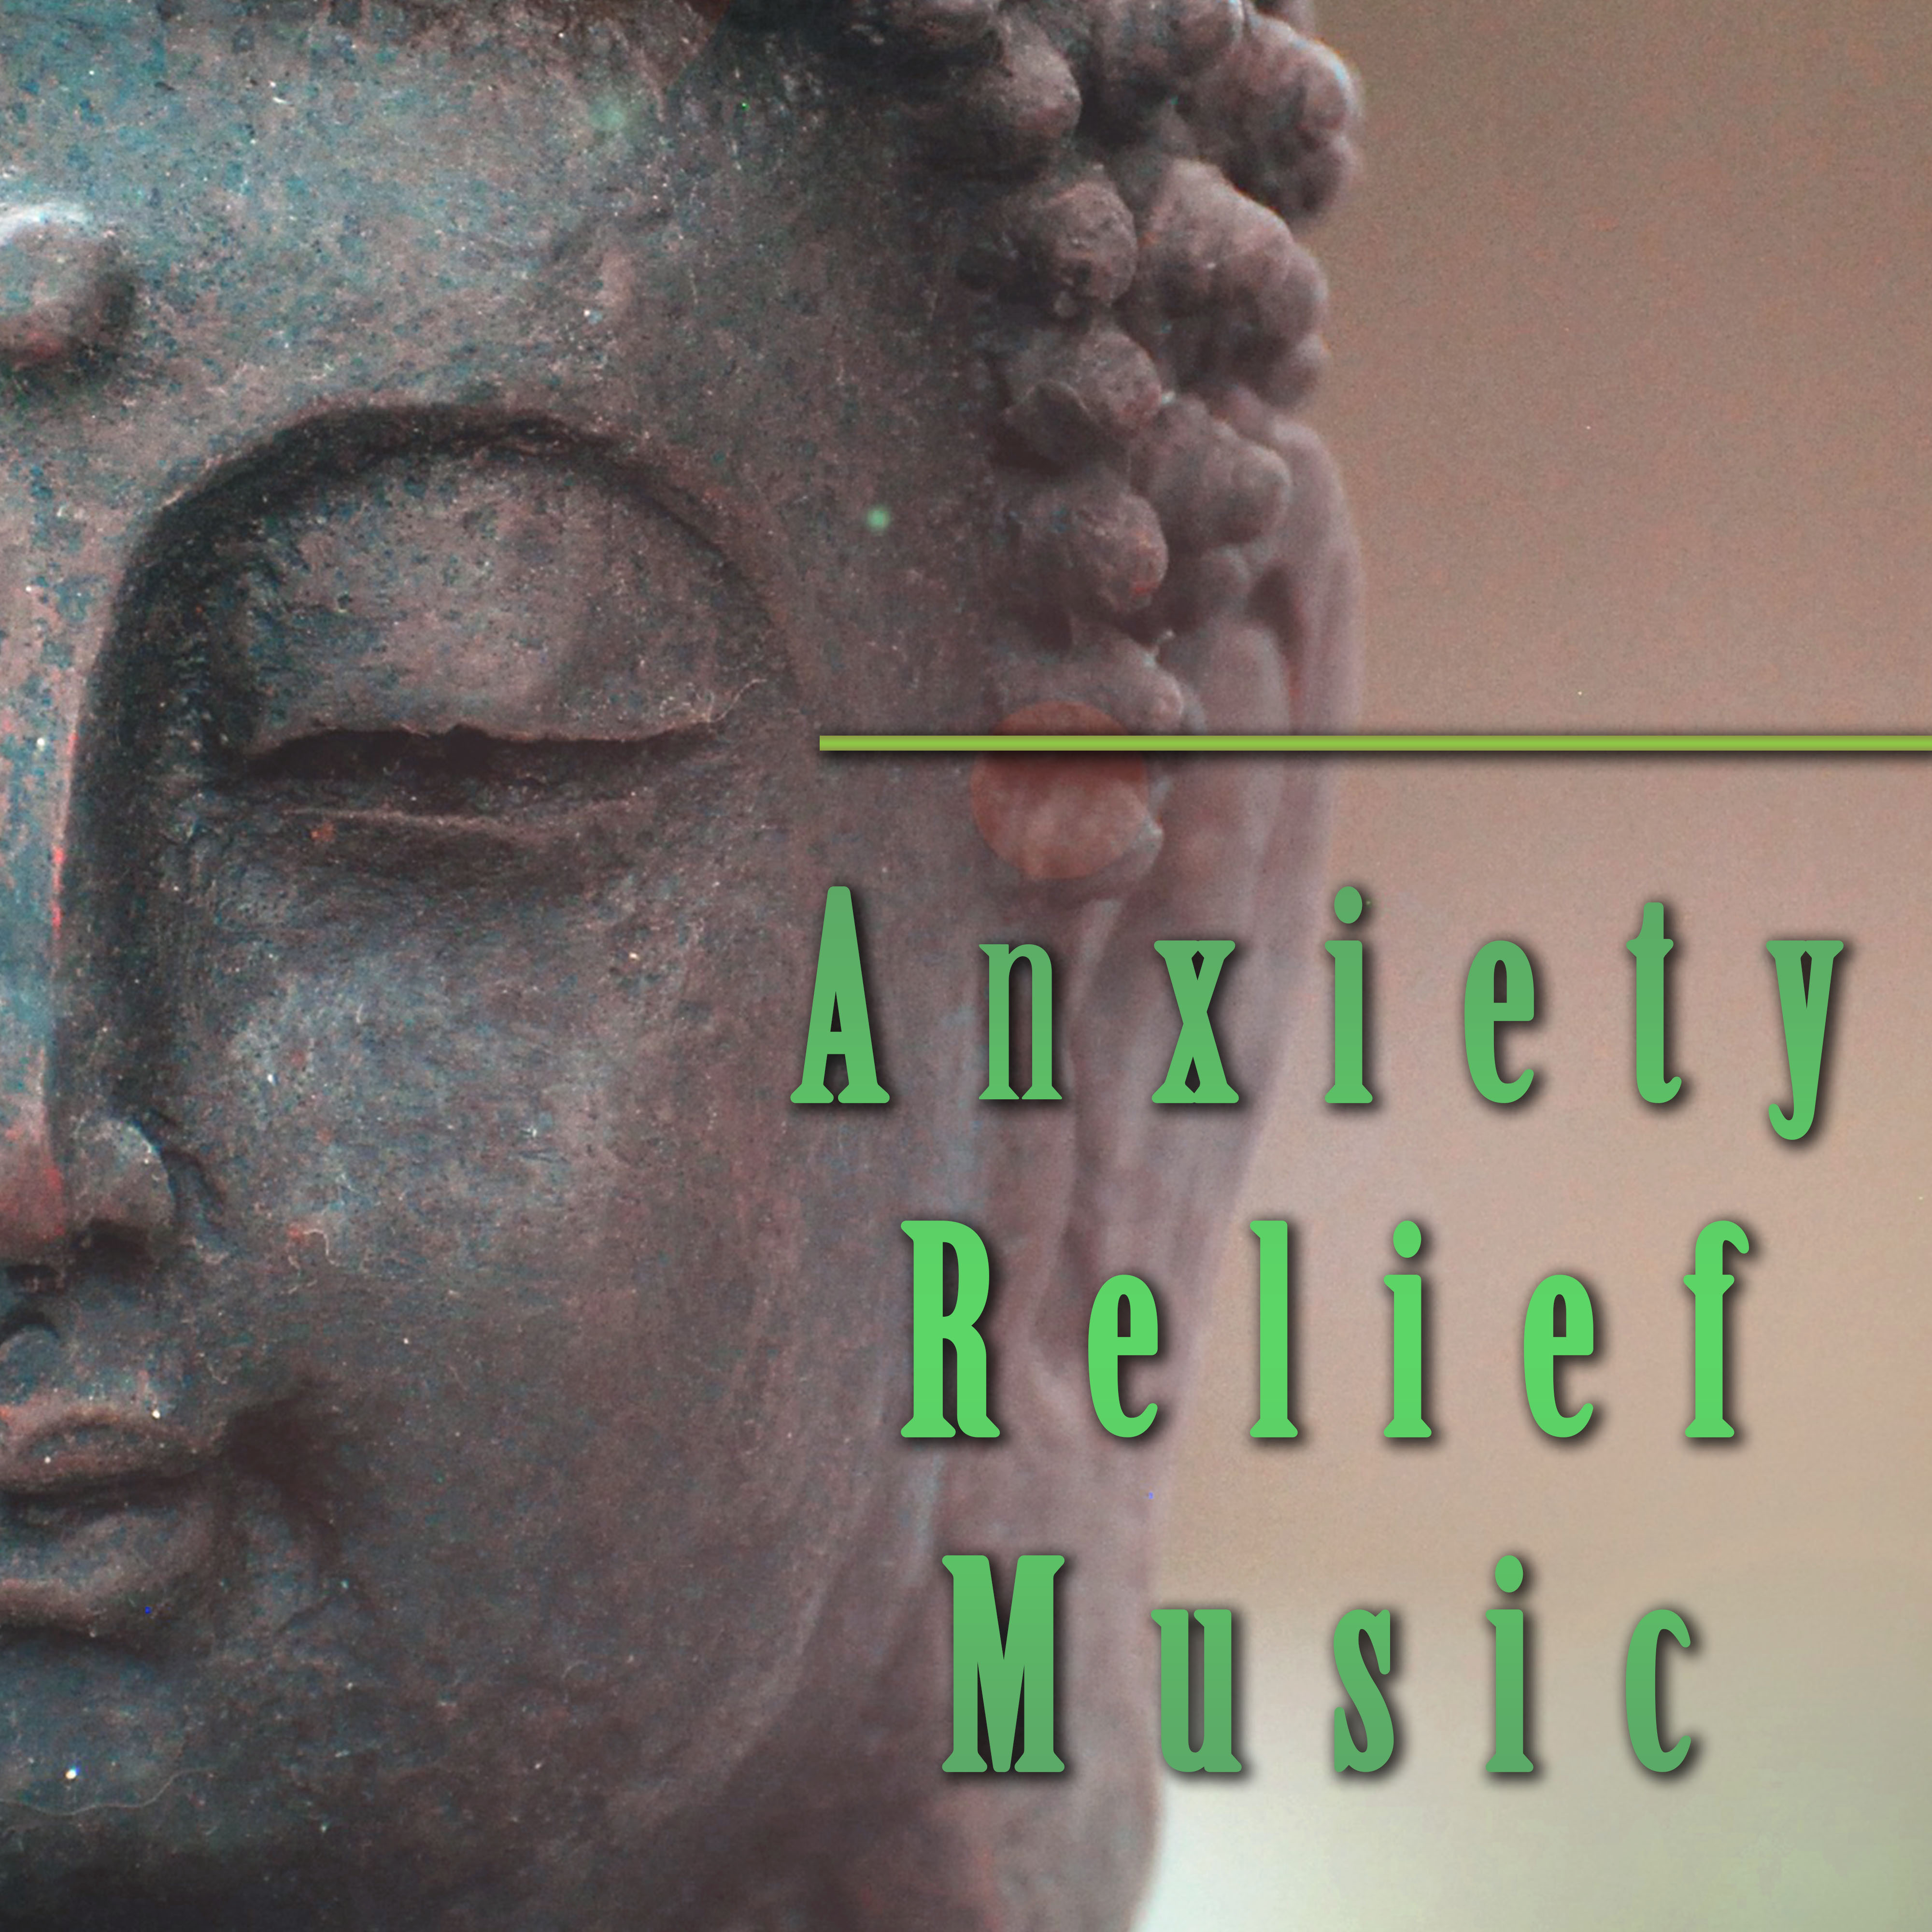 Meditation Mantra Music for Relaxation